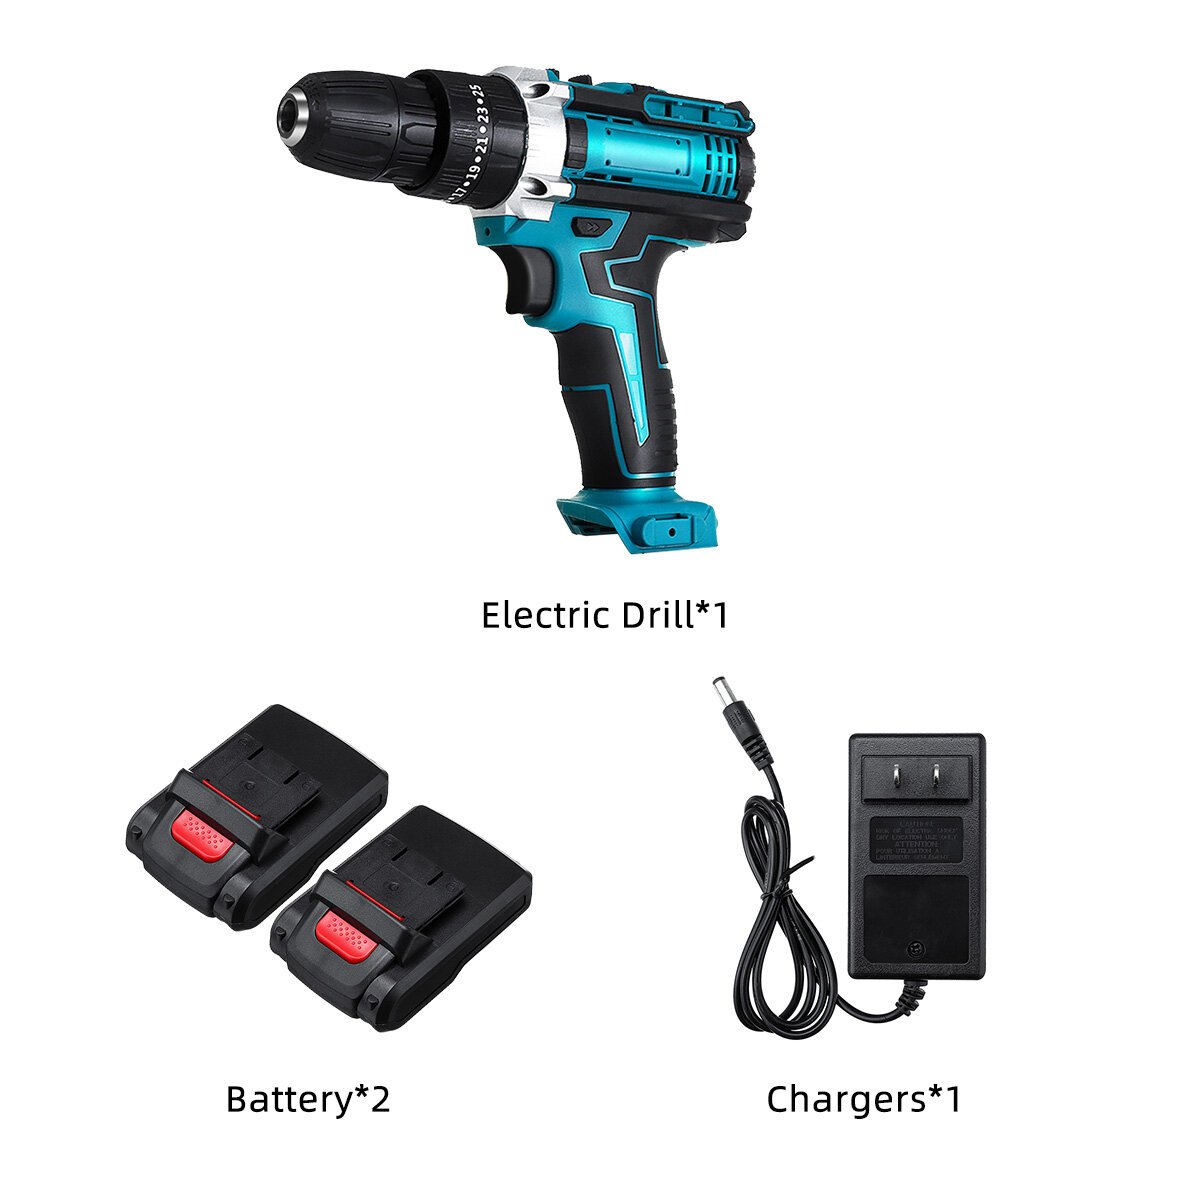 best price,drillpro,20v,1450rpm,3,gears,28nm,electric,drill,with,2,batteries,eu,coupon,price,discount